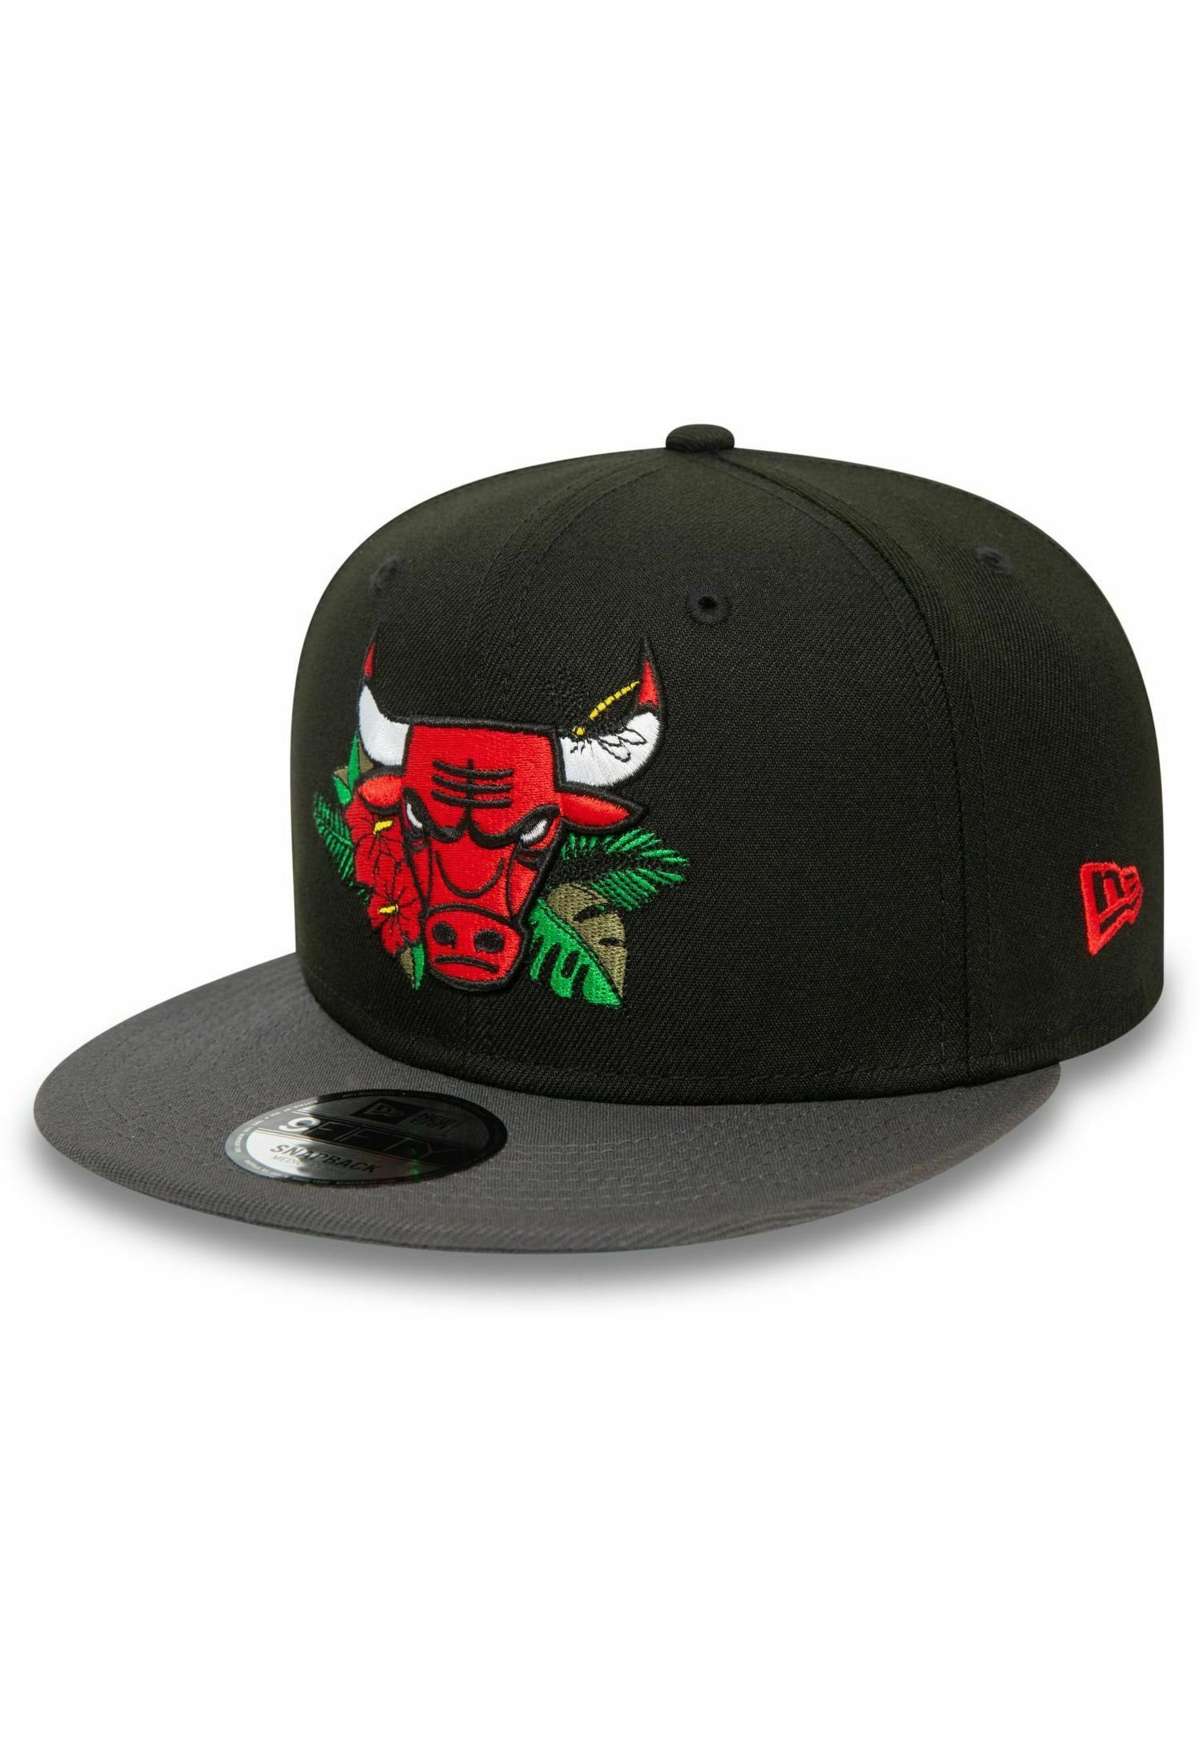 Кепка 9FIFTY FLORAL CHICAGO BULLS